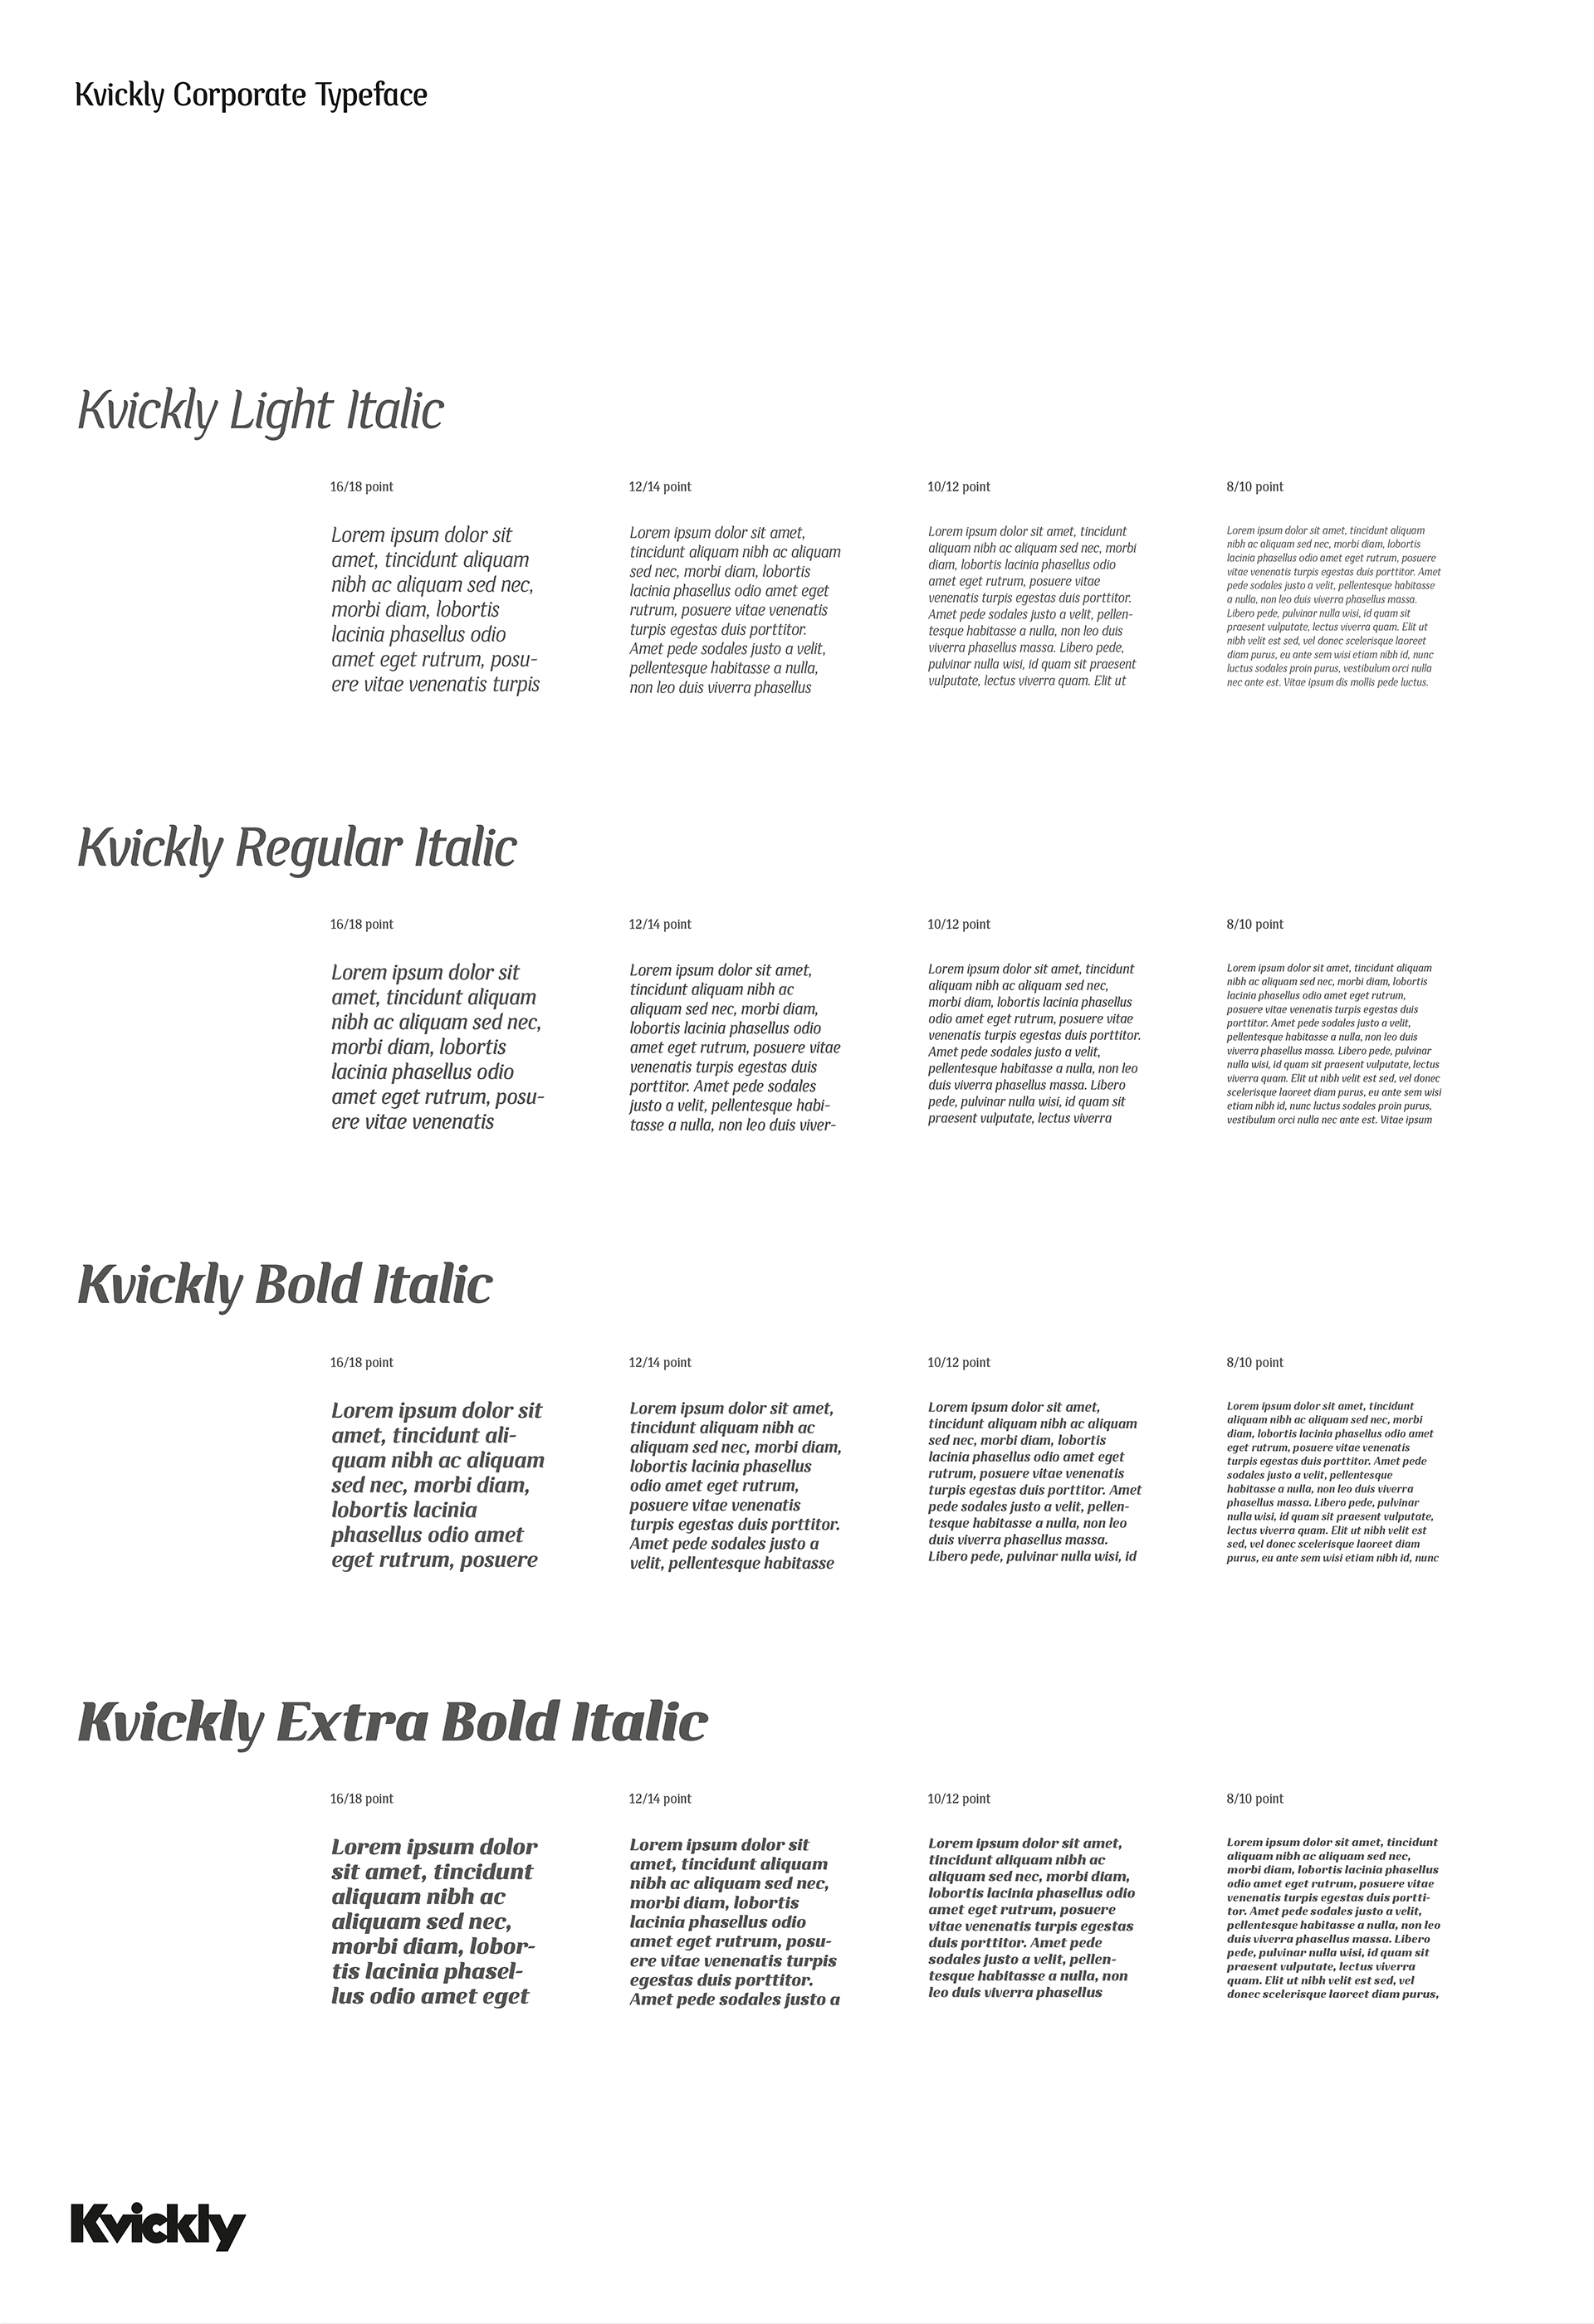 Kvickly typography guide by LOOP Associates